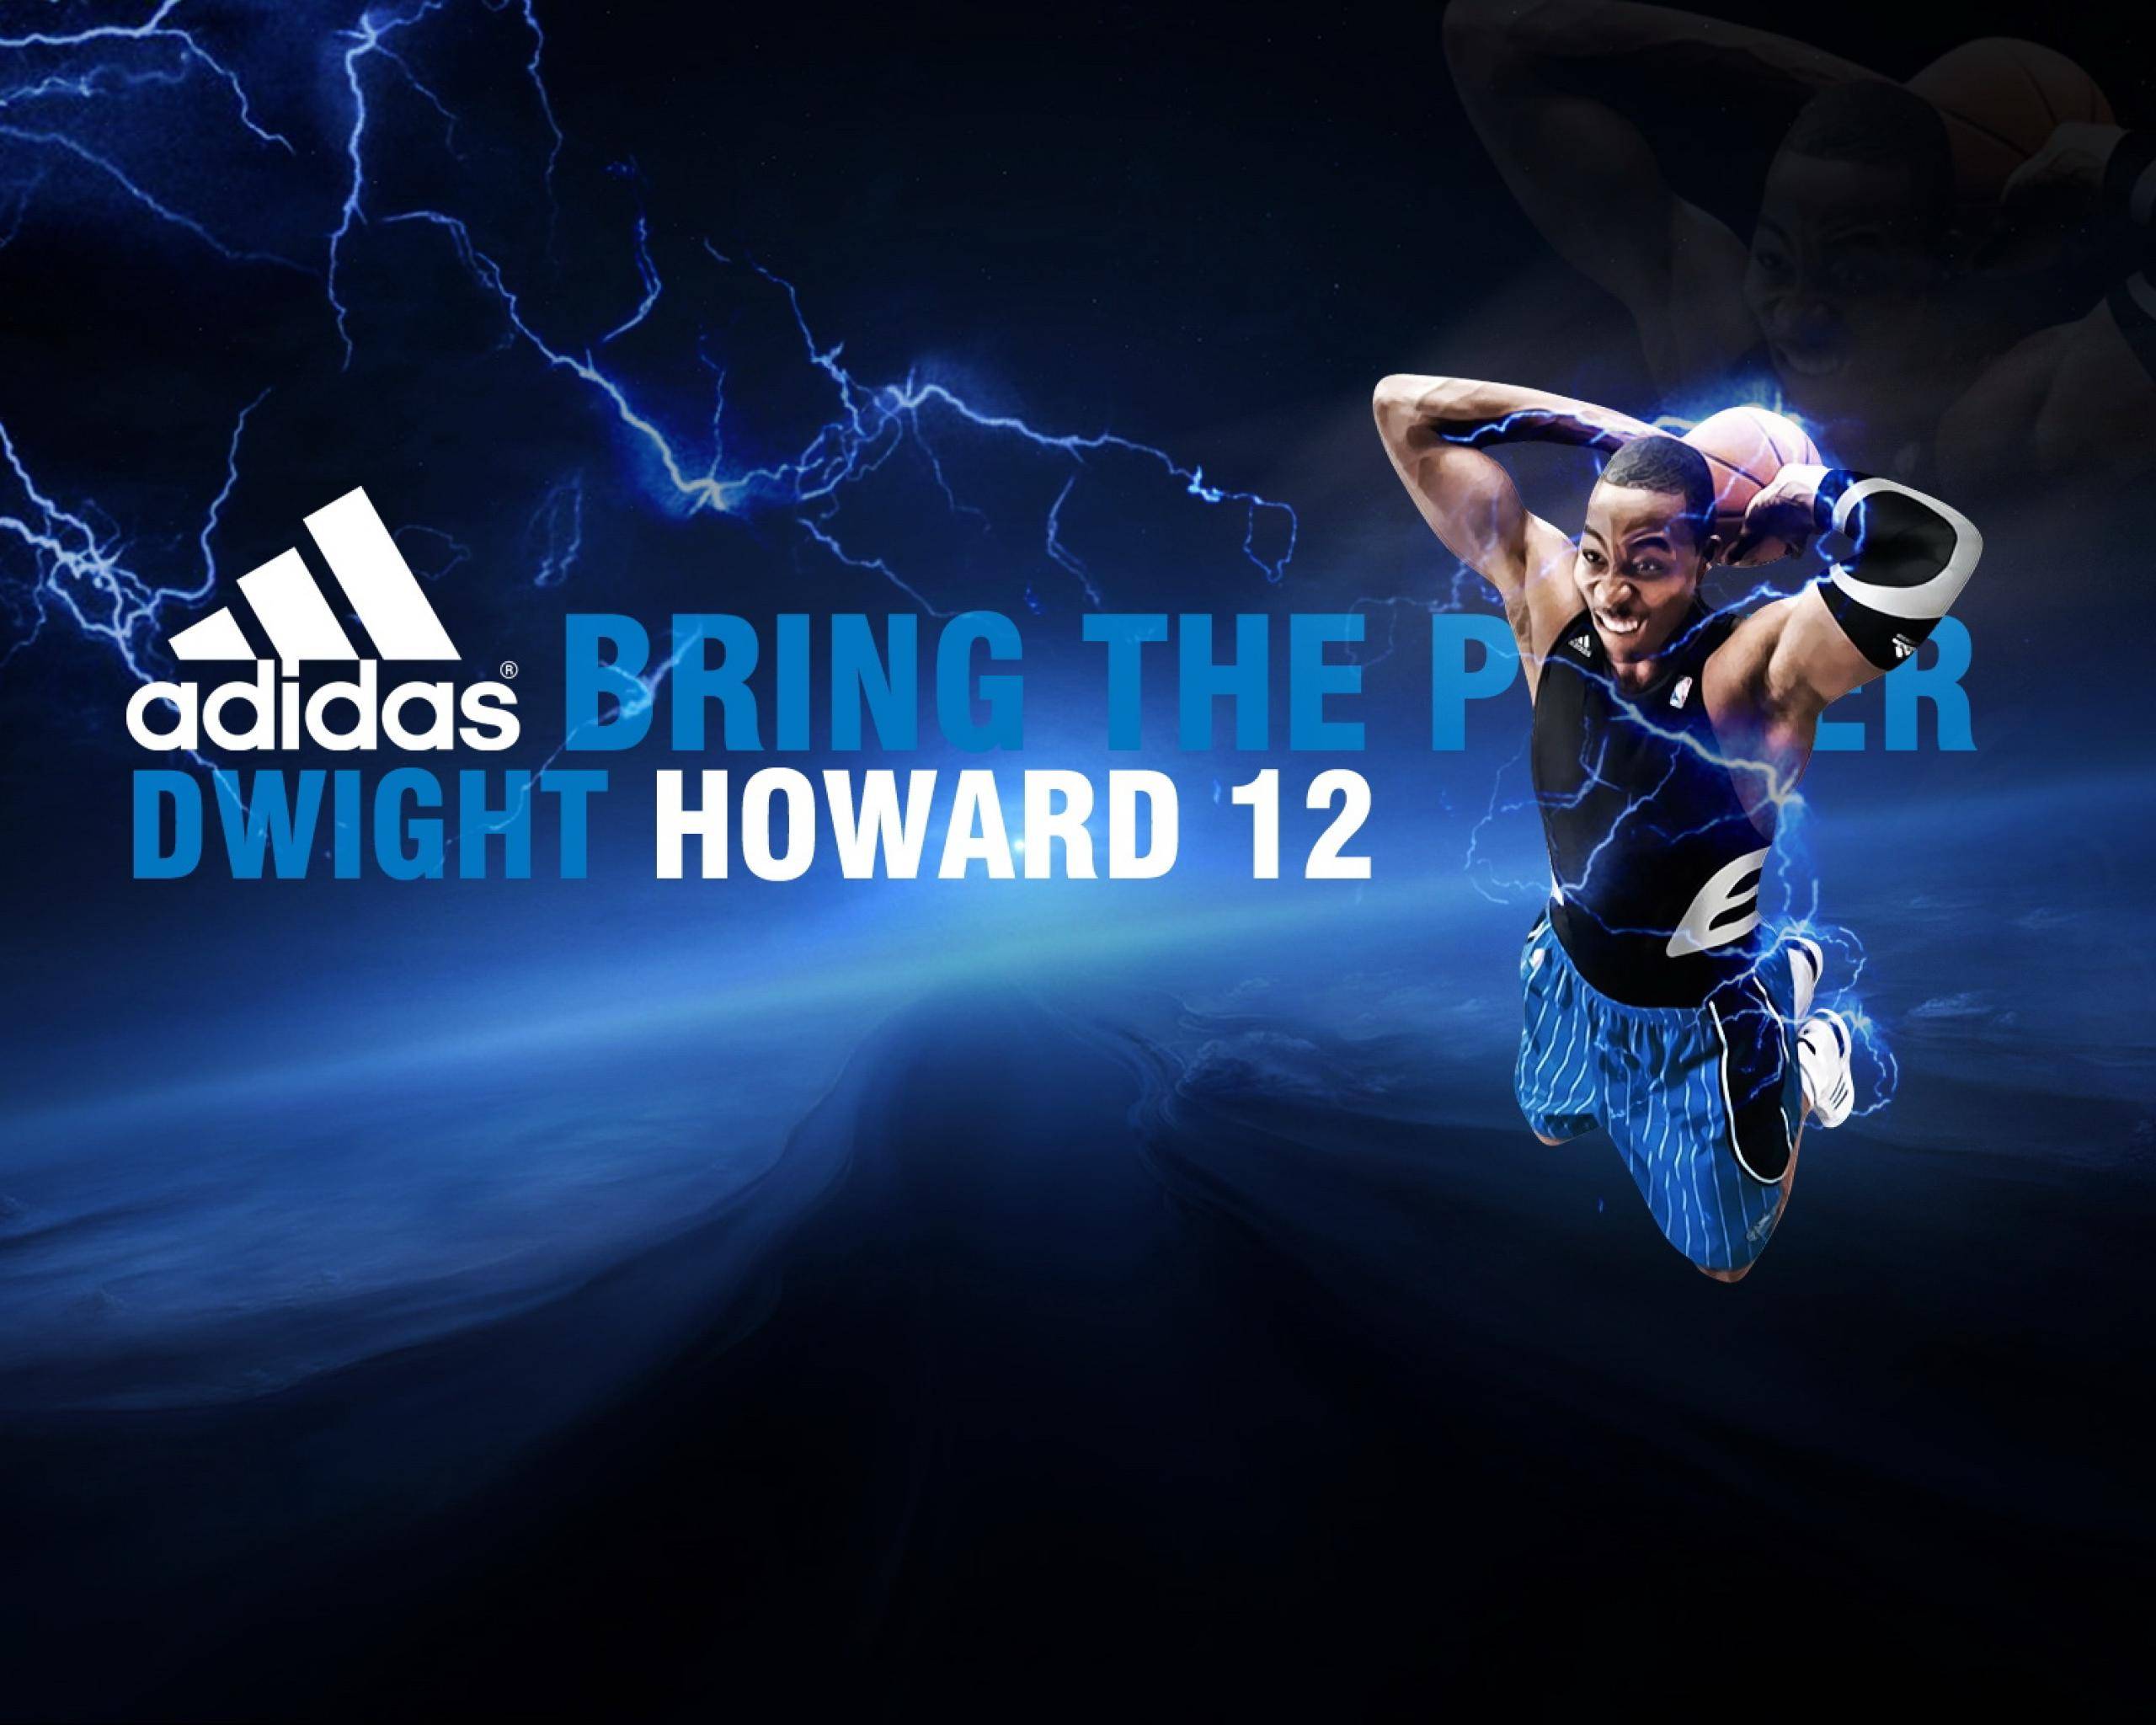 Free Best Adidas Basketball Image on your PC